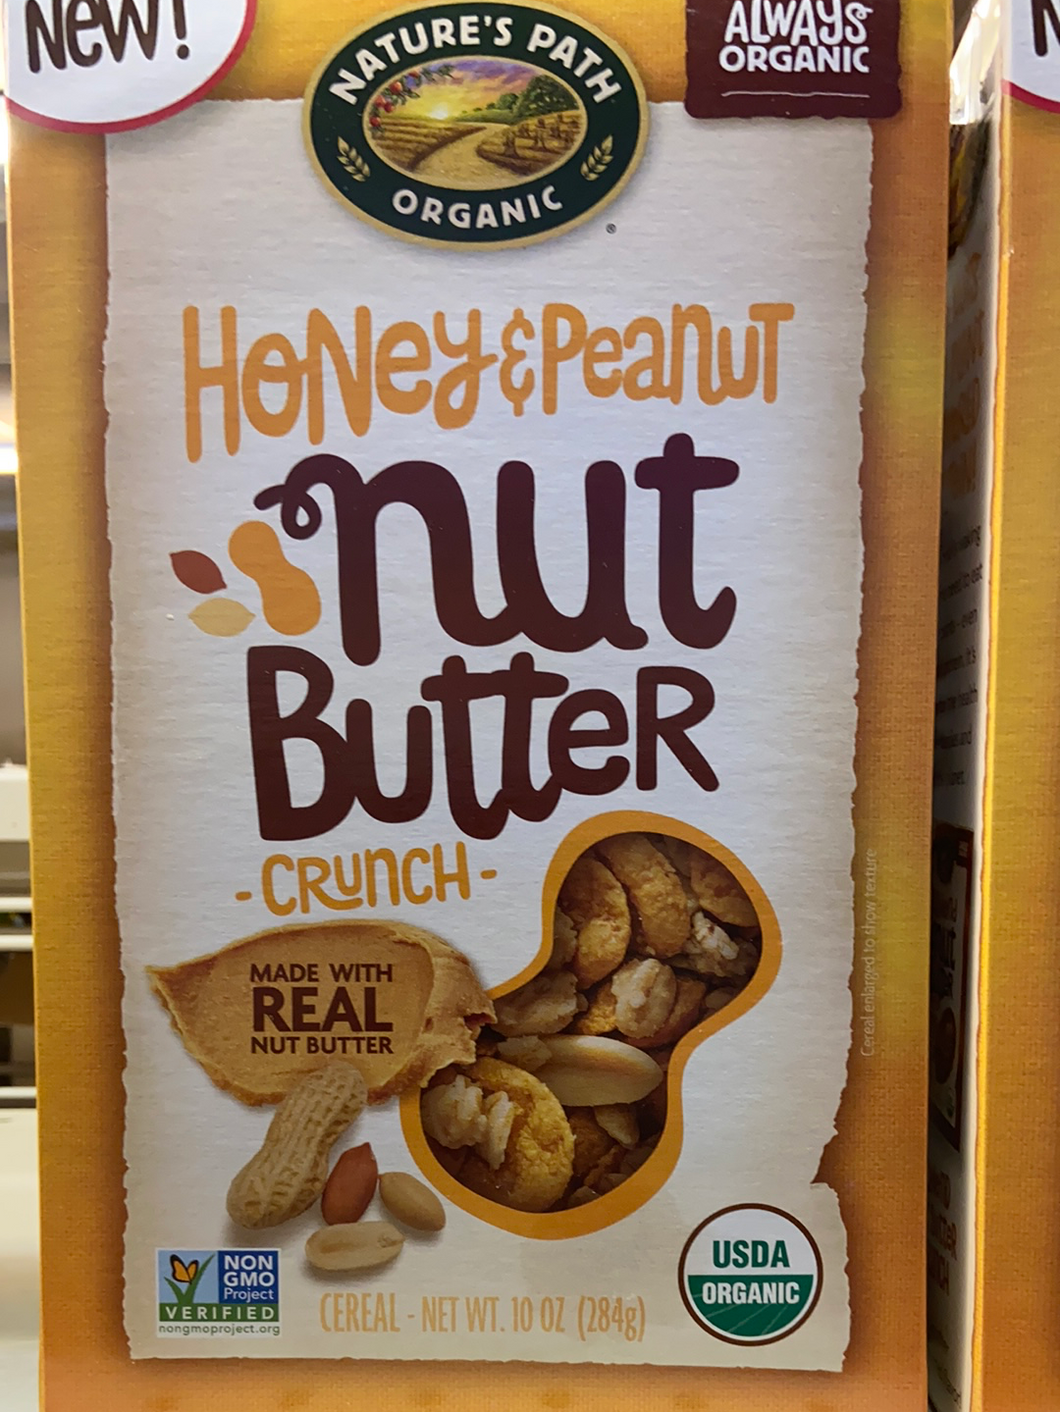 Cereal, Honey & Peanut Nut Butter Crunch, Organic, Nature's Path